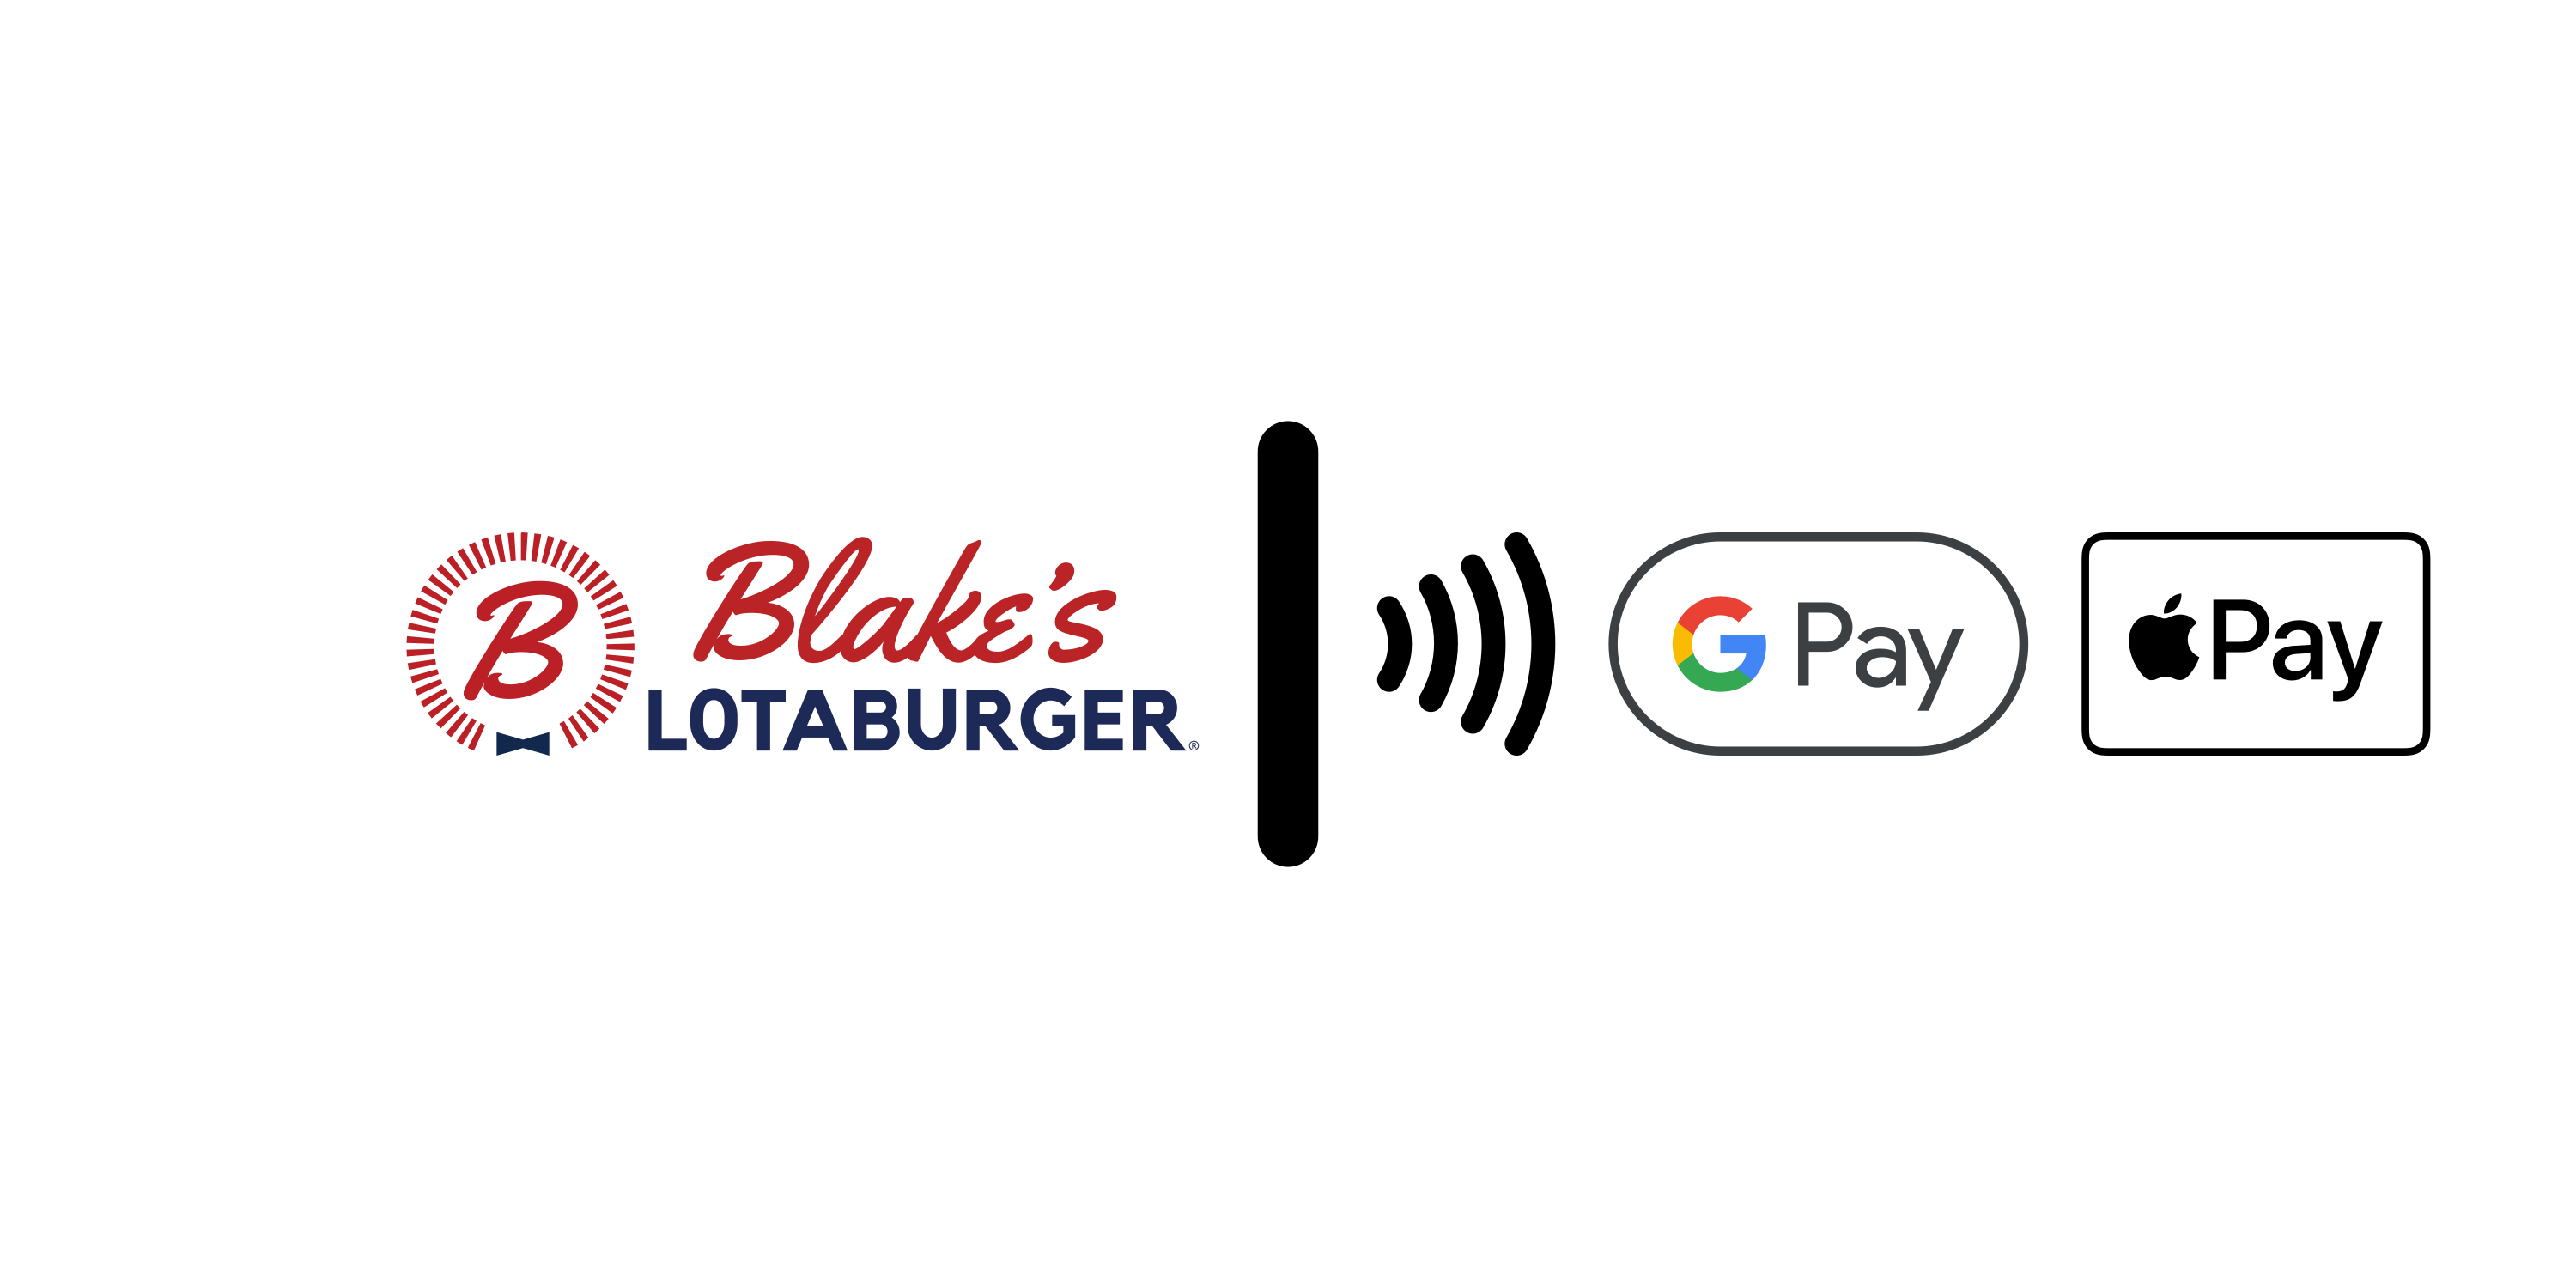 Blake's Lotaburger accepts contactless payments, as well as Google Pay & Apple Pay online.